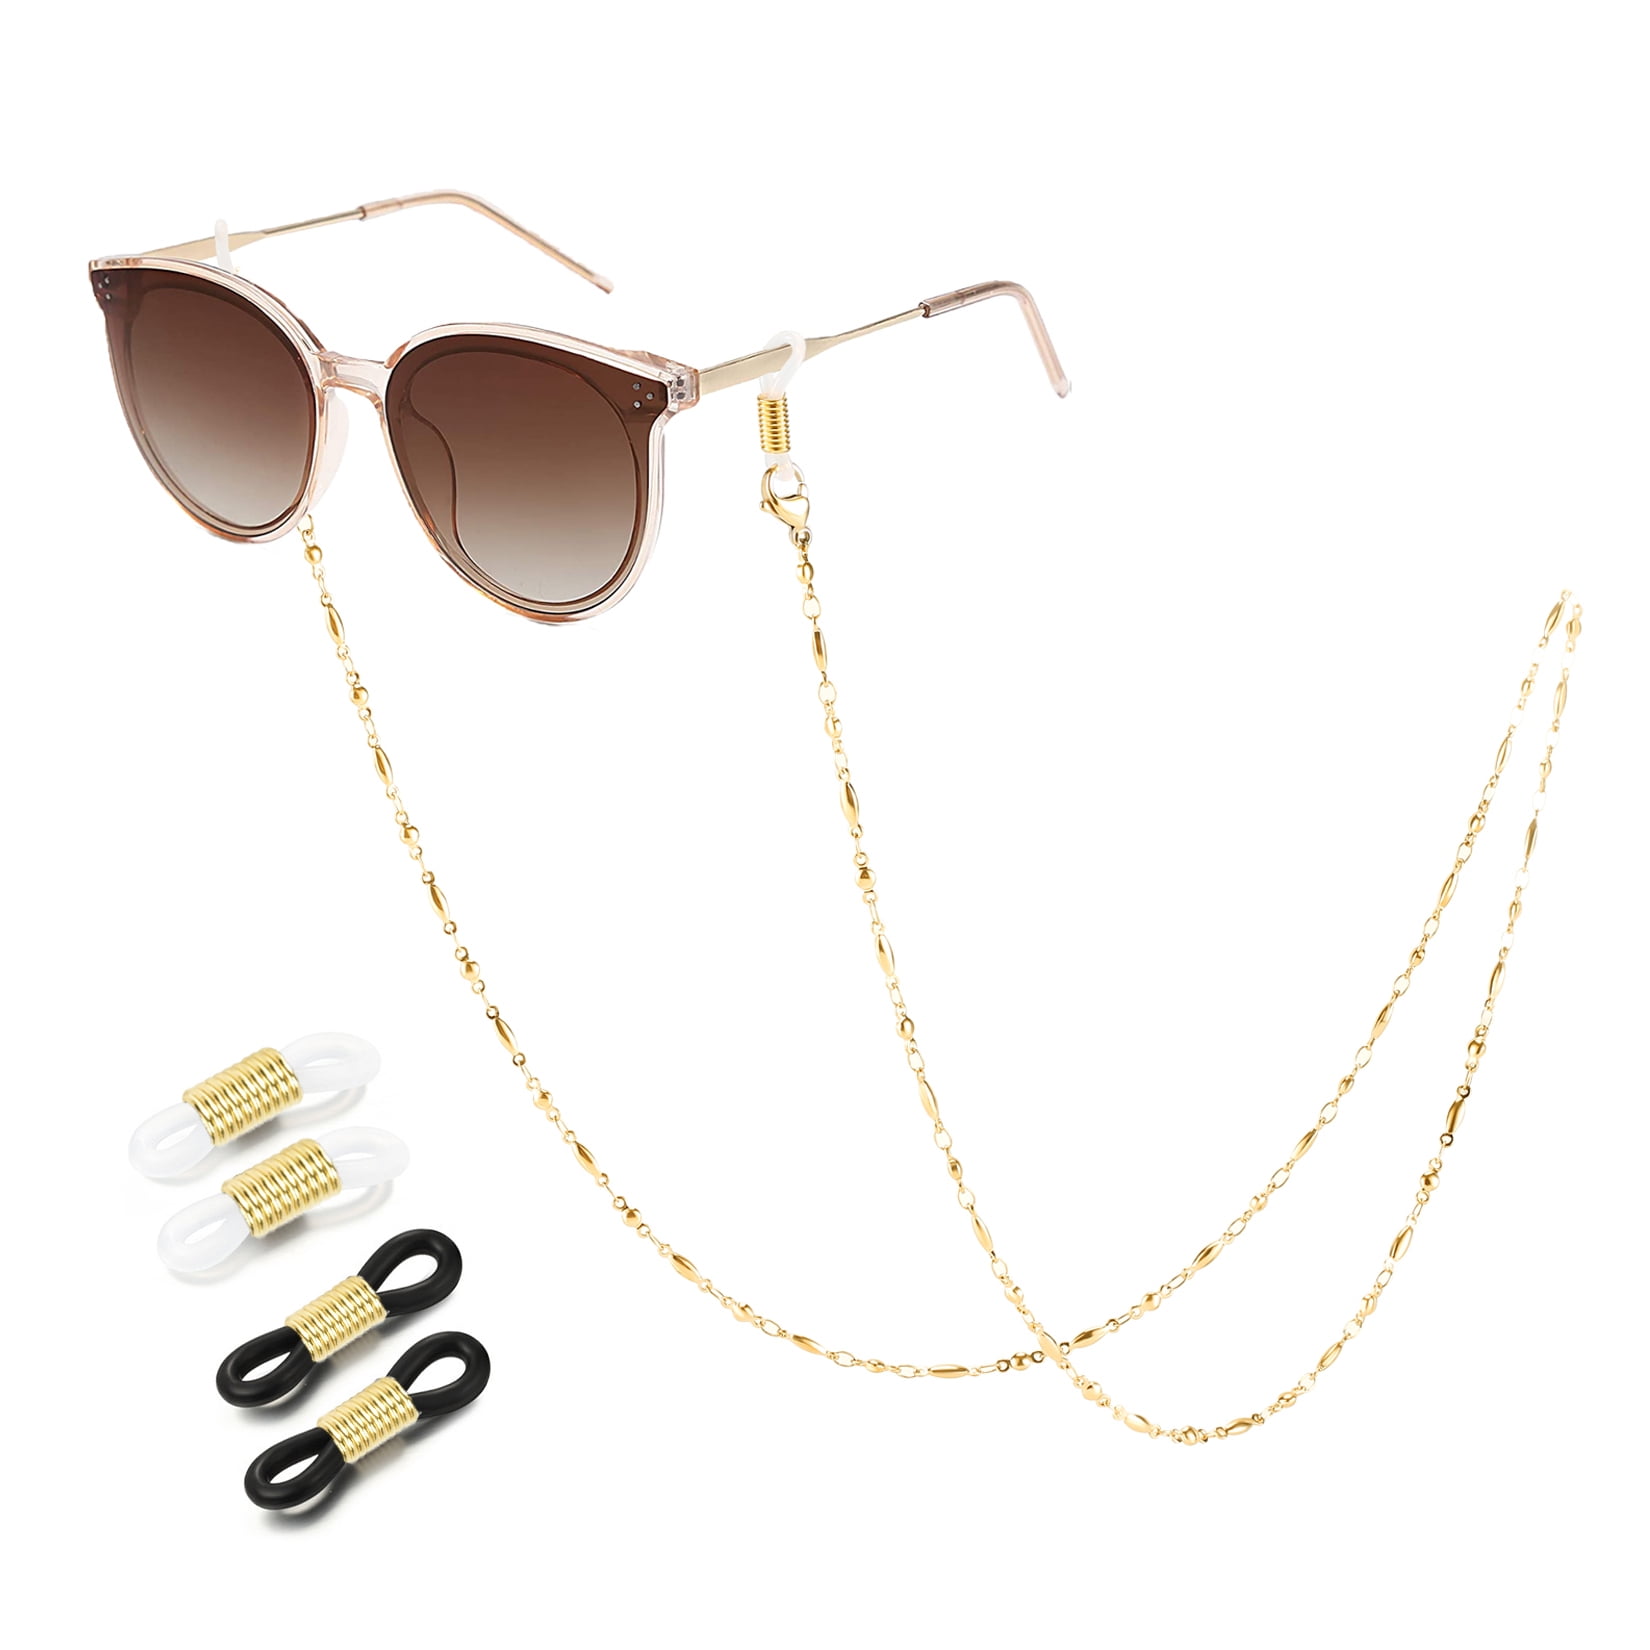 Shine Bright With Our Gold Glasses Chain Secure Your Eyewear and Masks in  Style 30 Days Guarantee Inside. Shop Now 